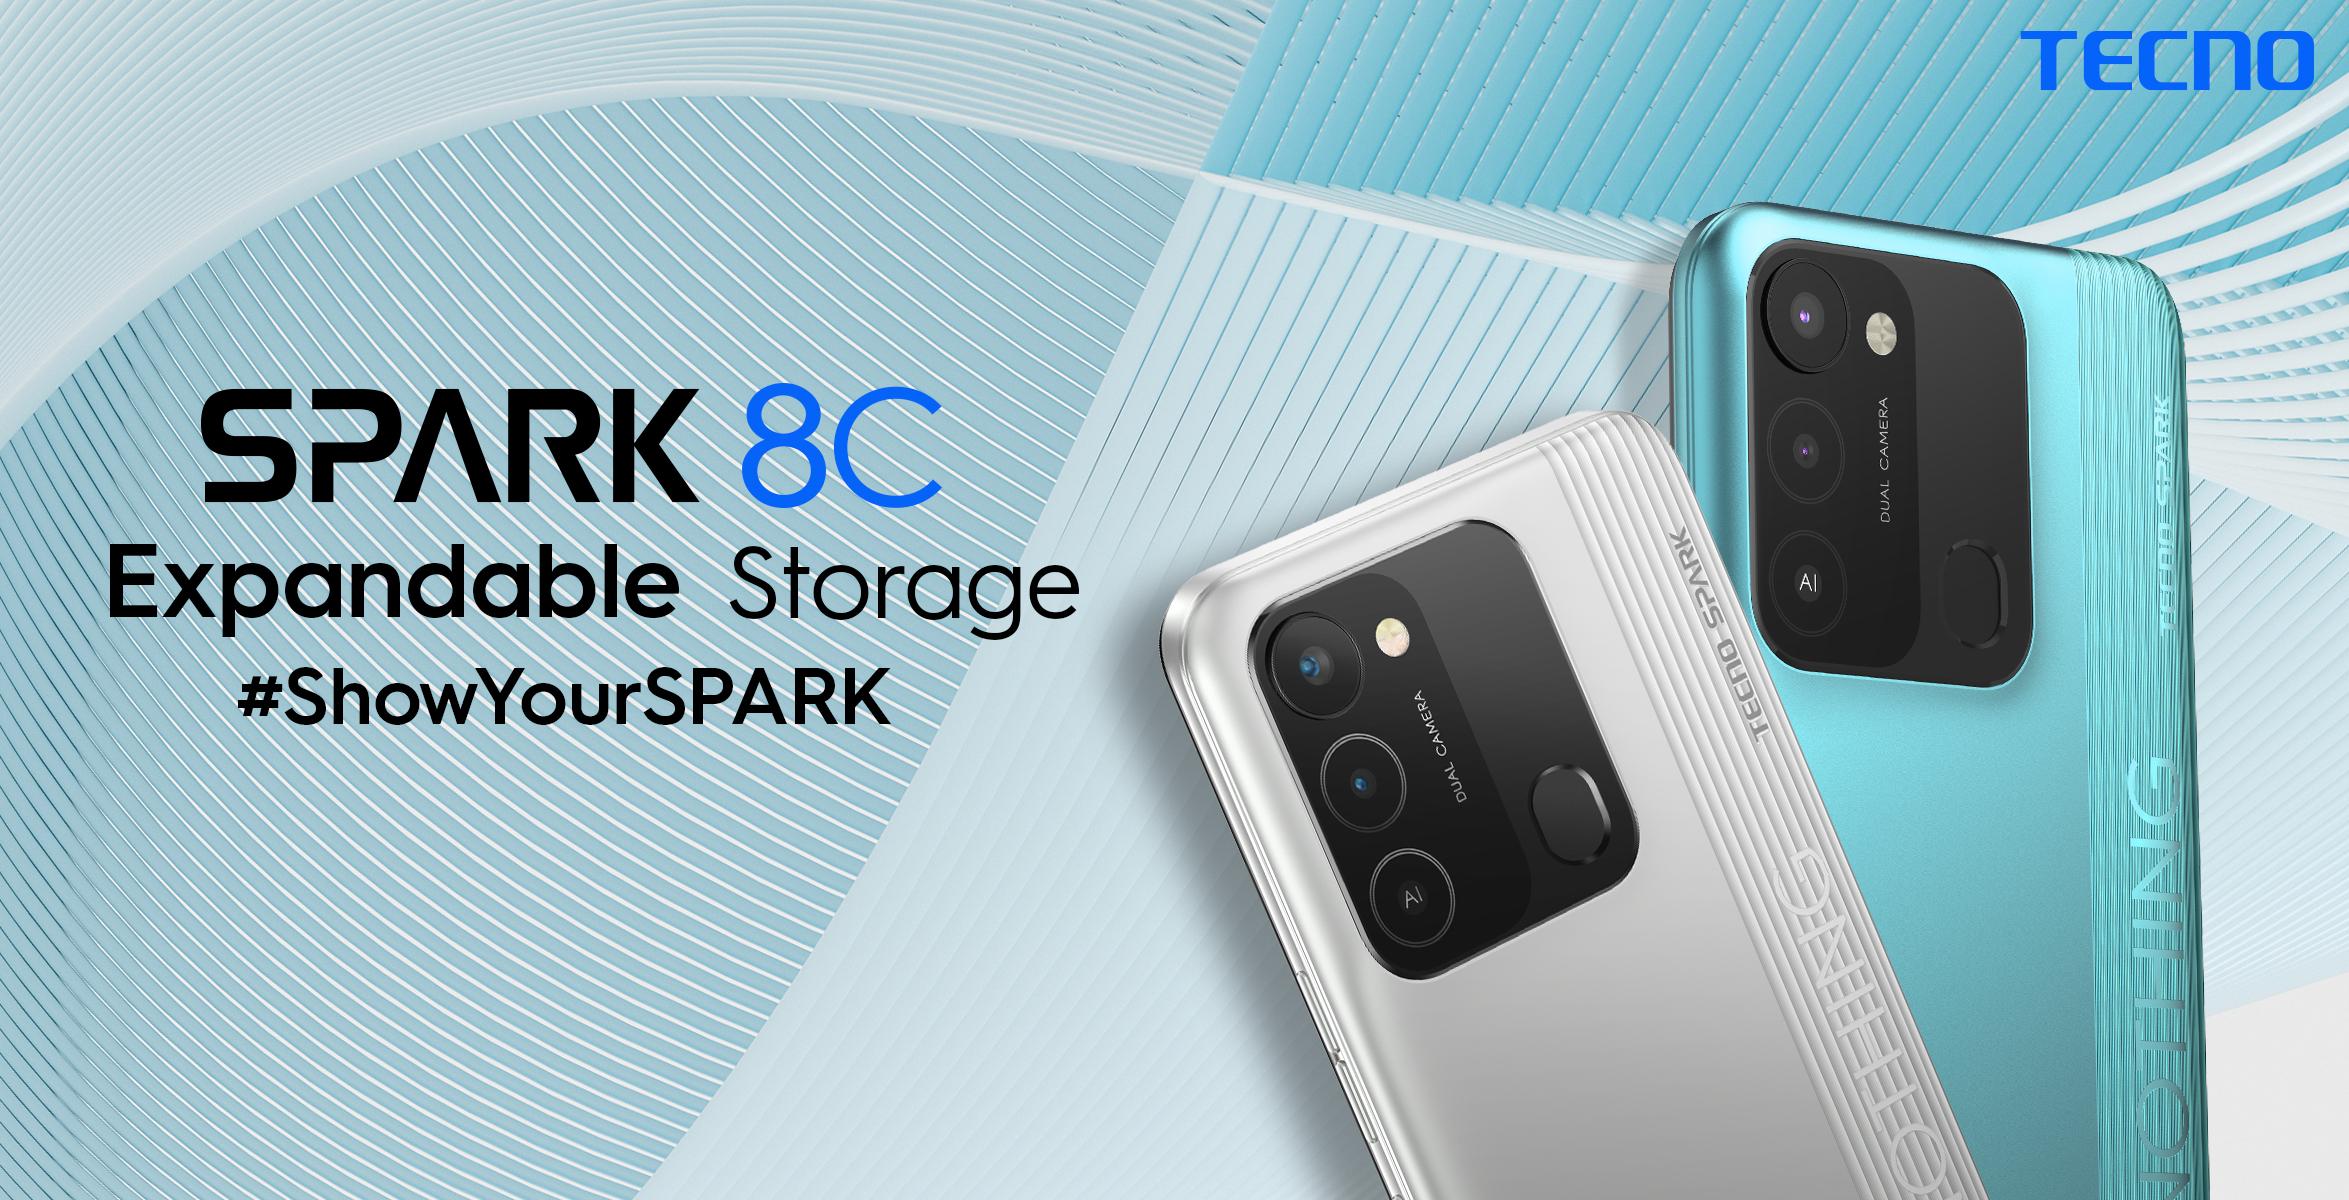 TECNO announces the launch of the all-new Spark 8C in Pakistan